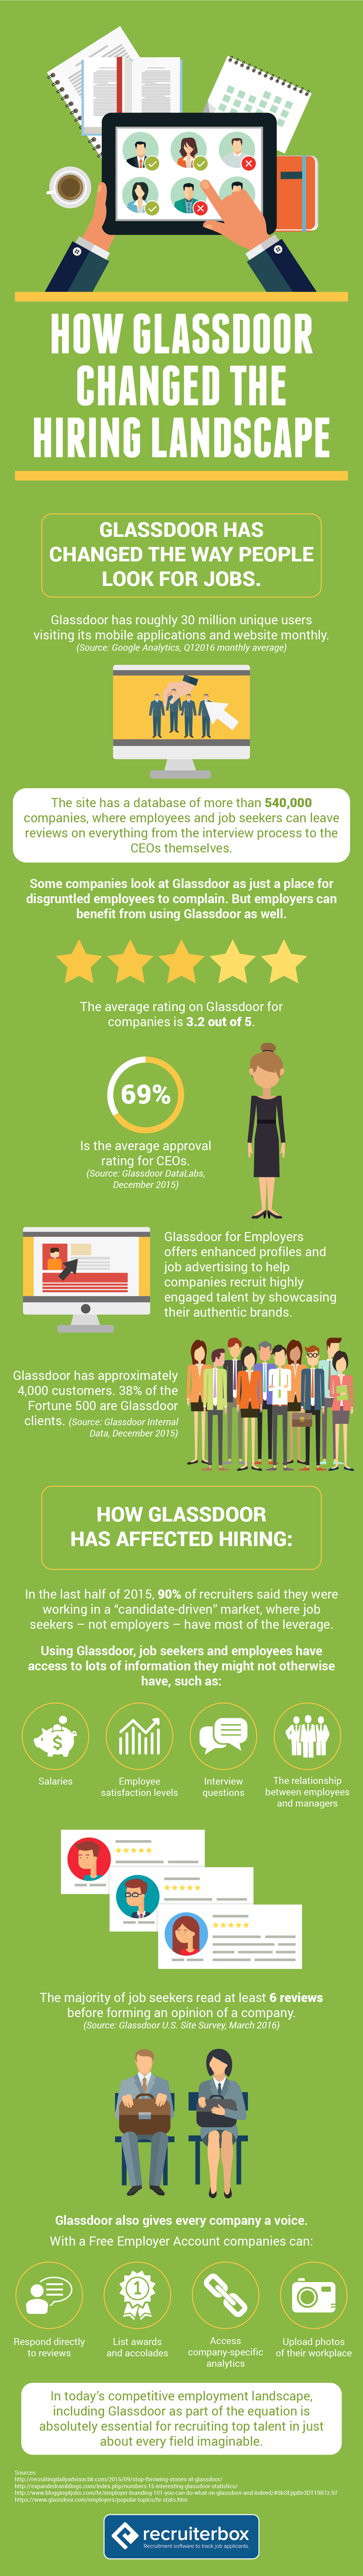 Glassdoor and the Hiring Landscape Infographic